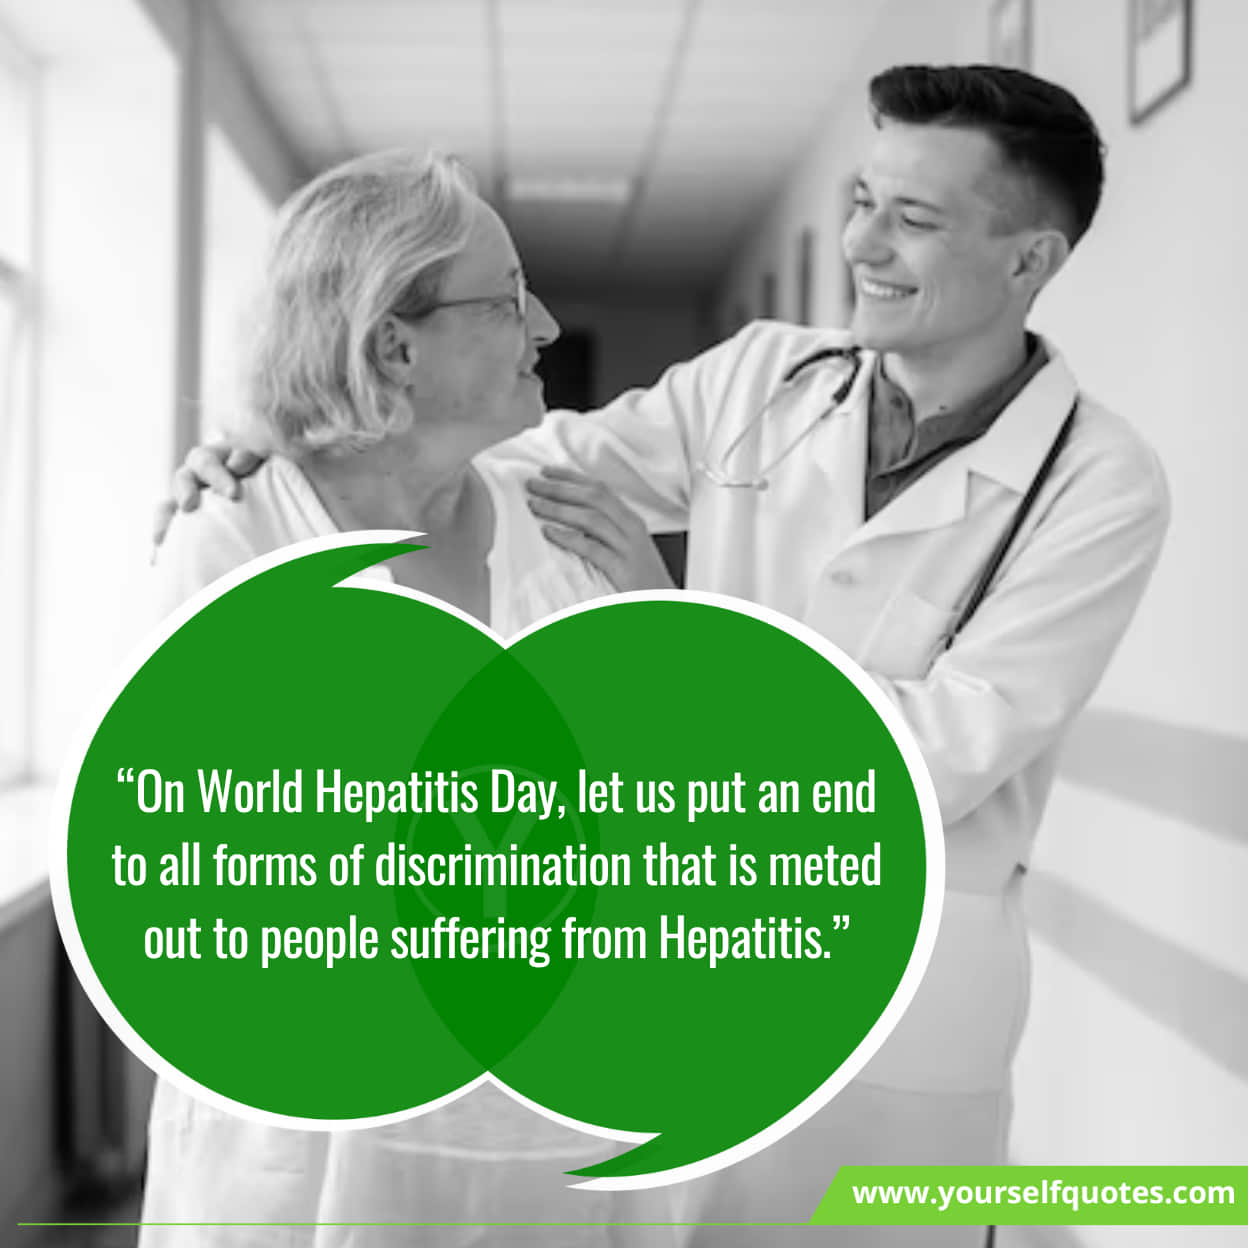 Inspirational quotes for World Hepatitis Day